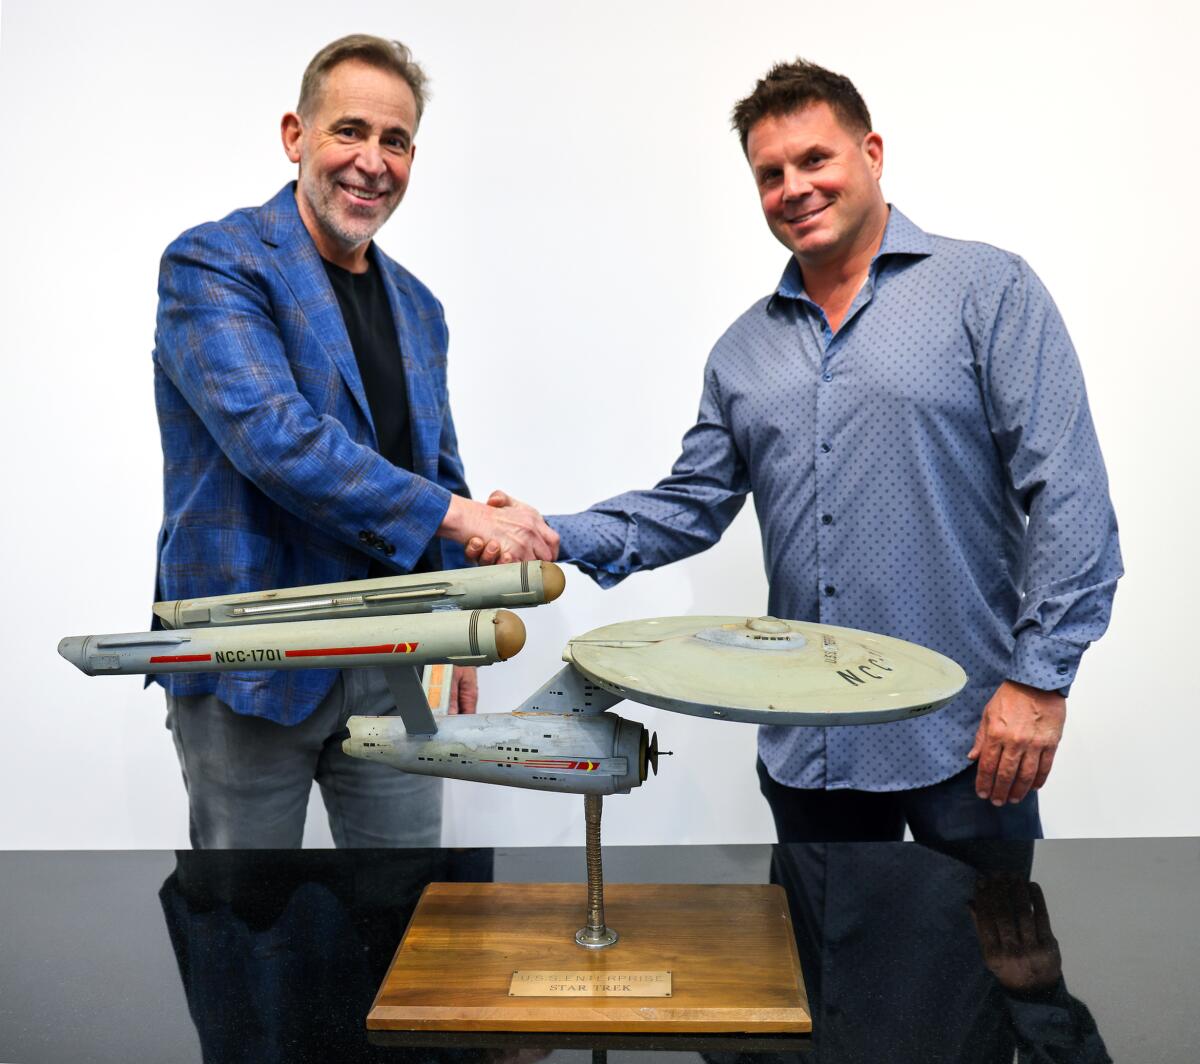 Two men shake hands next to a model of the U.S.S. Enterprise